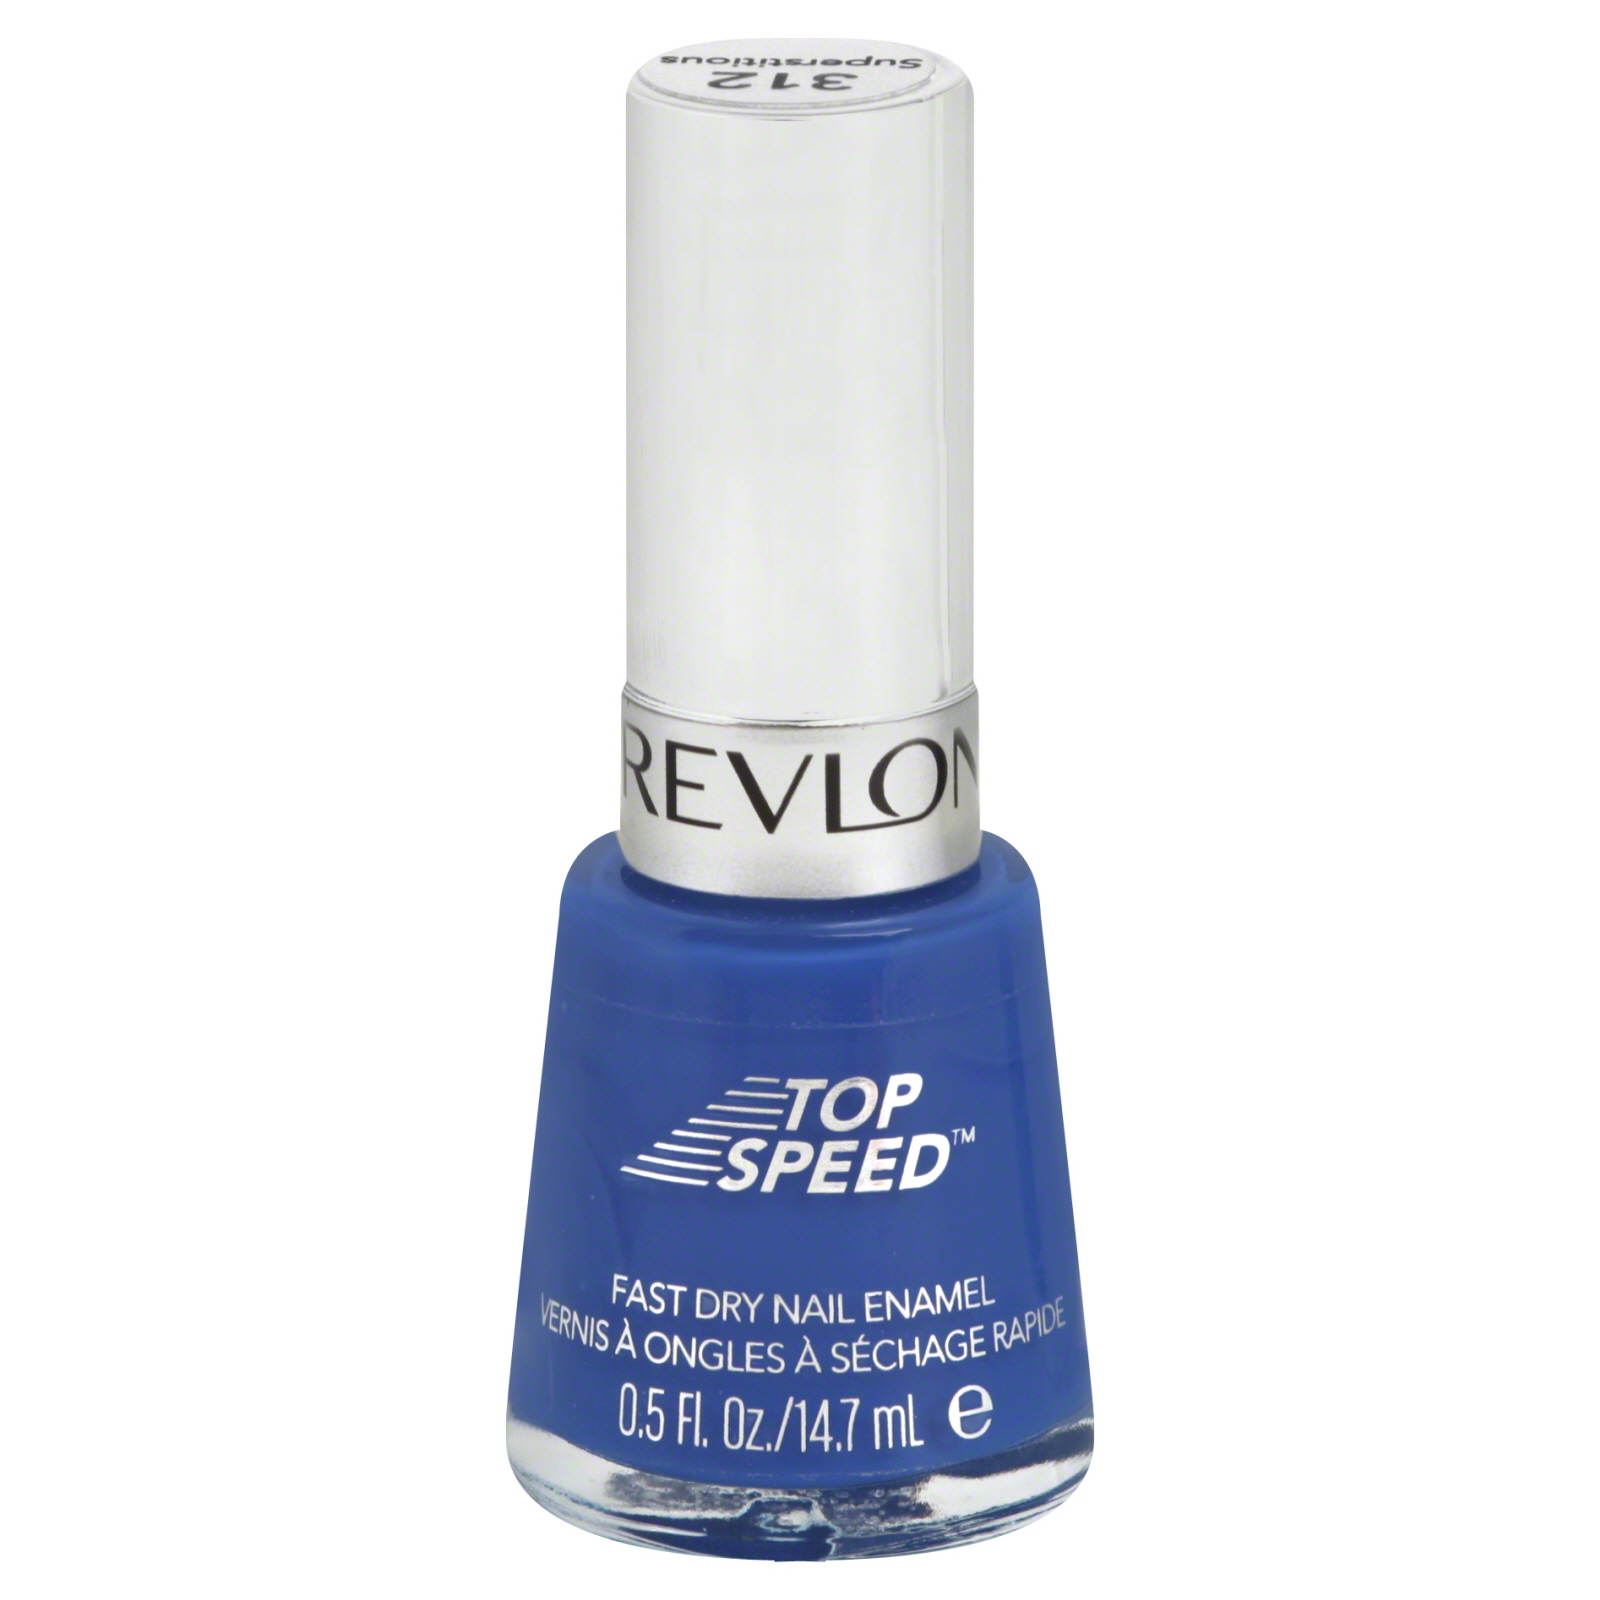 Top Speed Nail Enamel, Fast Dry, Superstitious 312, 0.5 fl oz (14.7 ml)